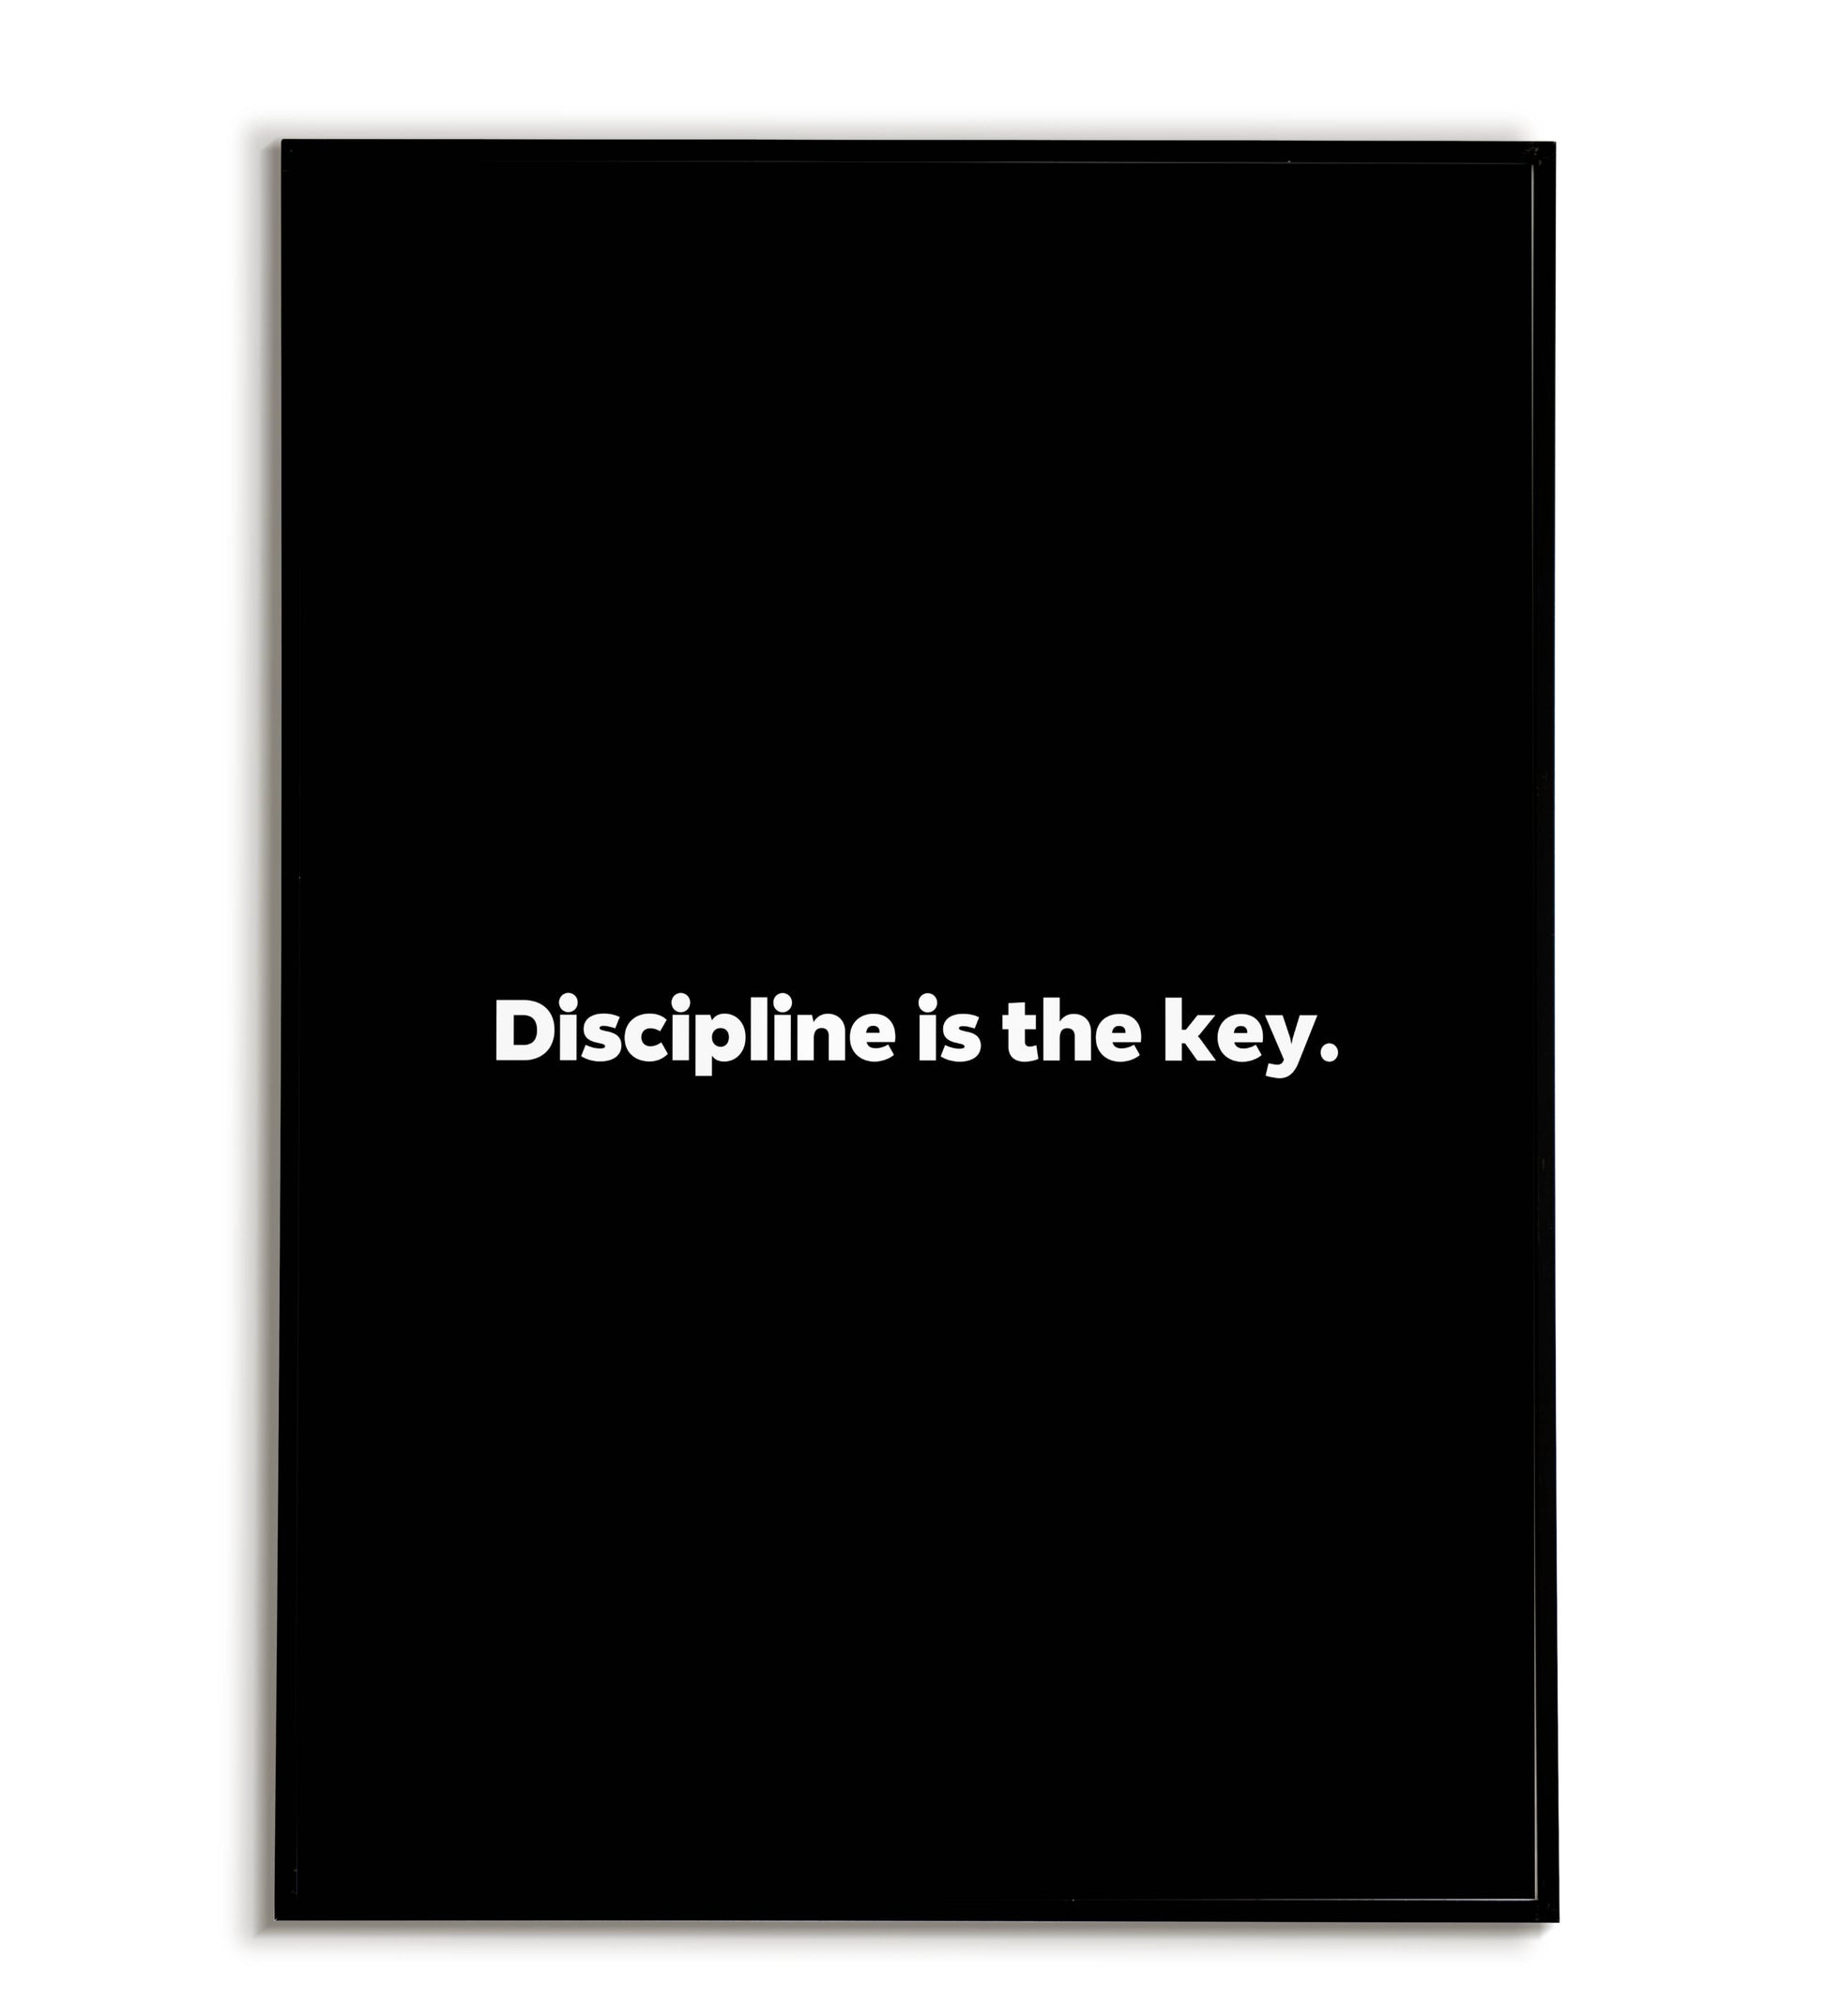 Discipline is the key - Printable Wall Art / Poster. A simple yet powerful reminder of discipline's importance.